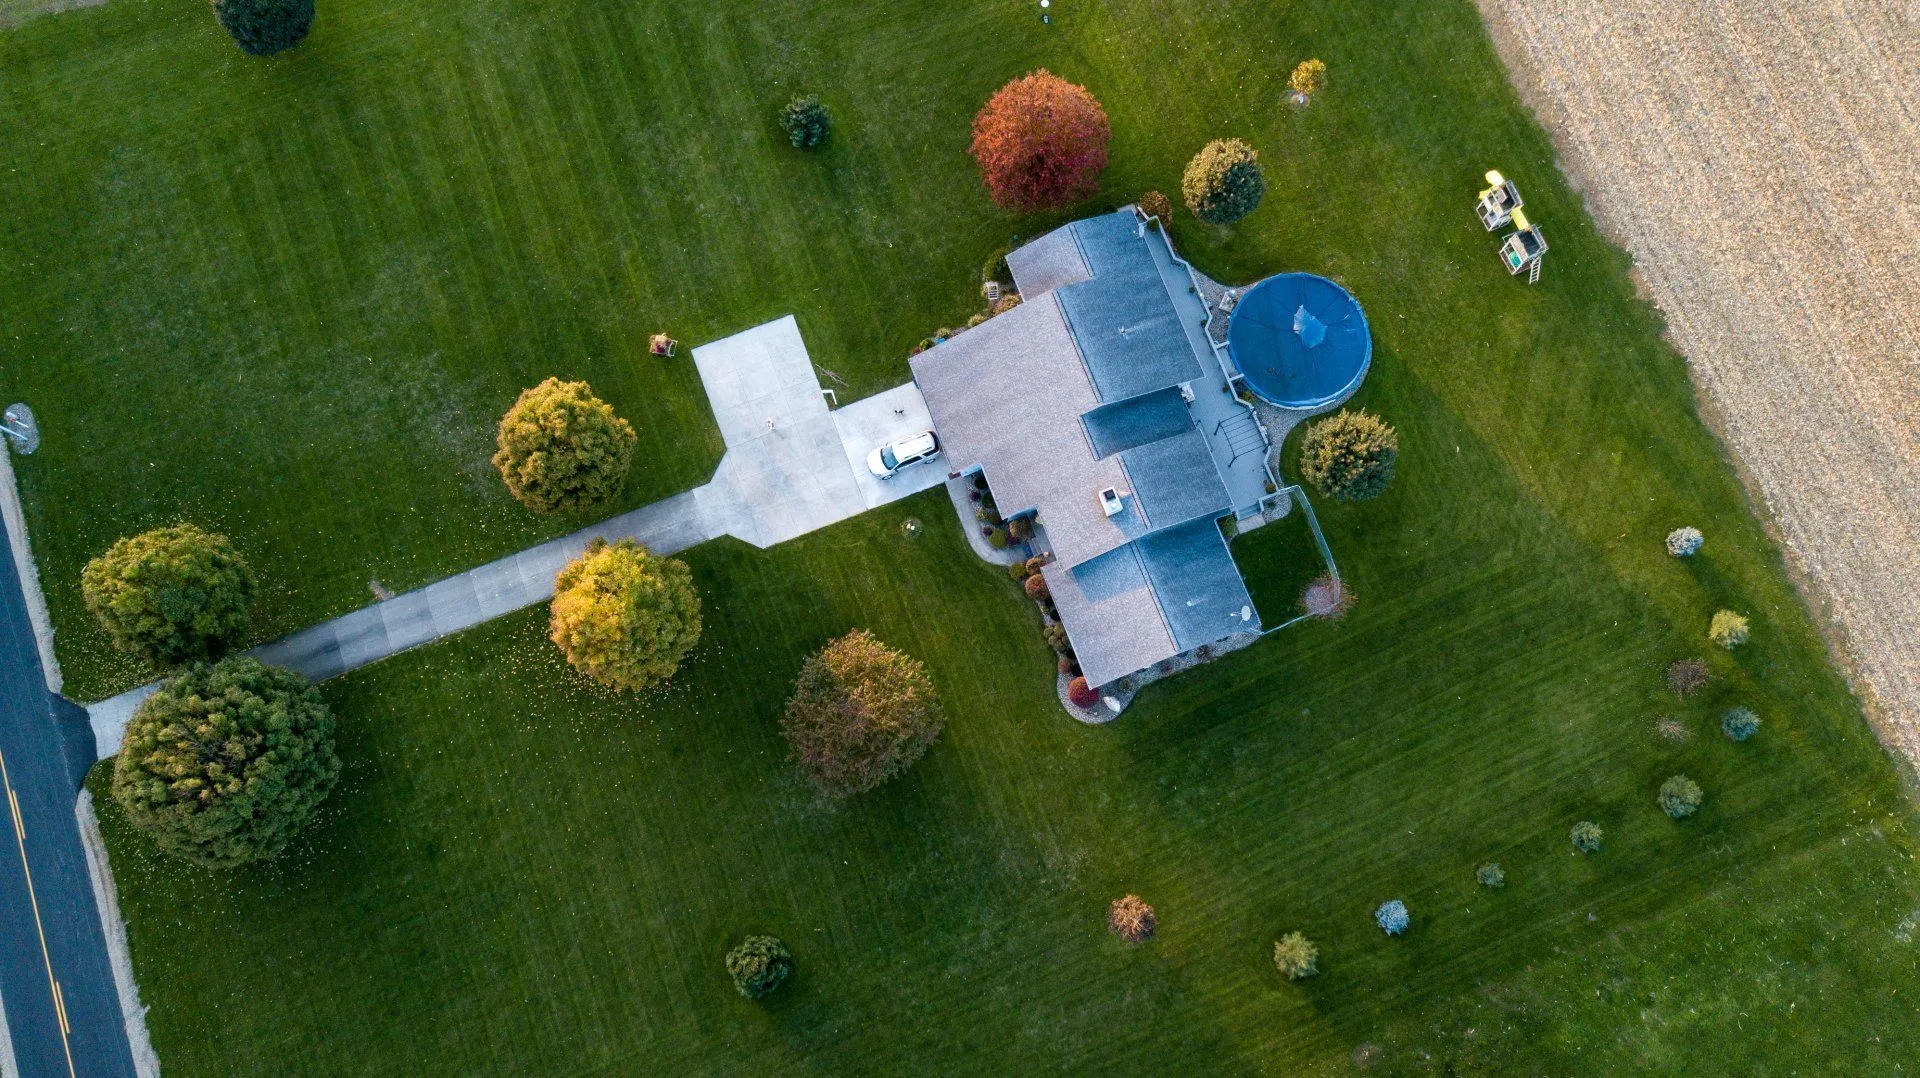 Lawn Care Services in Middletown NJ